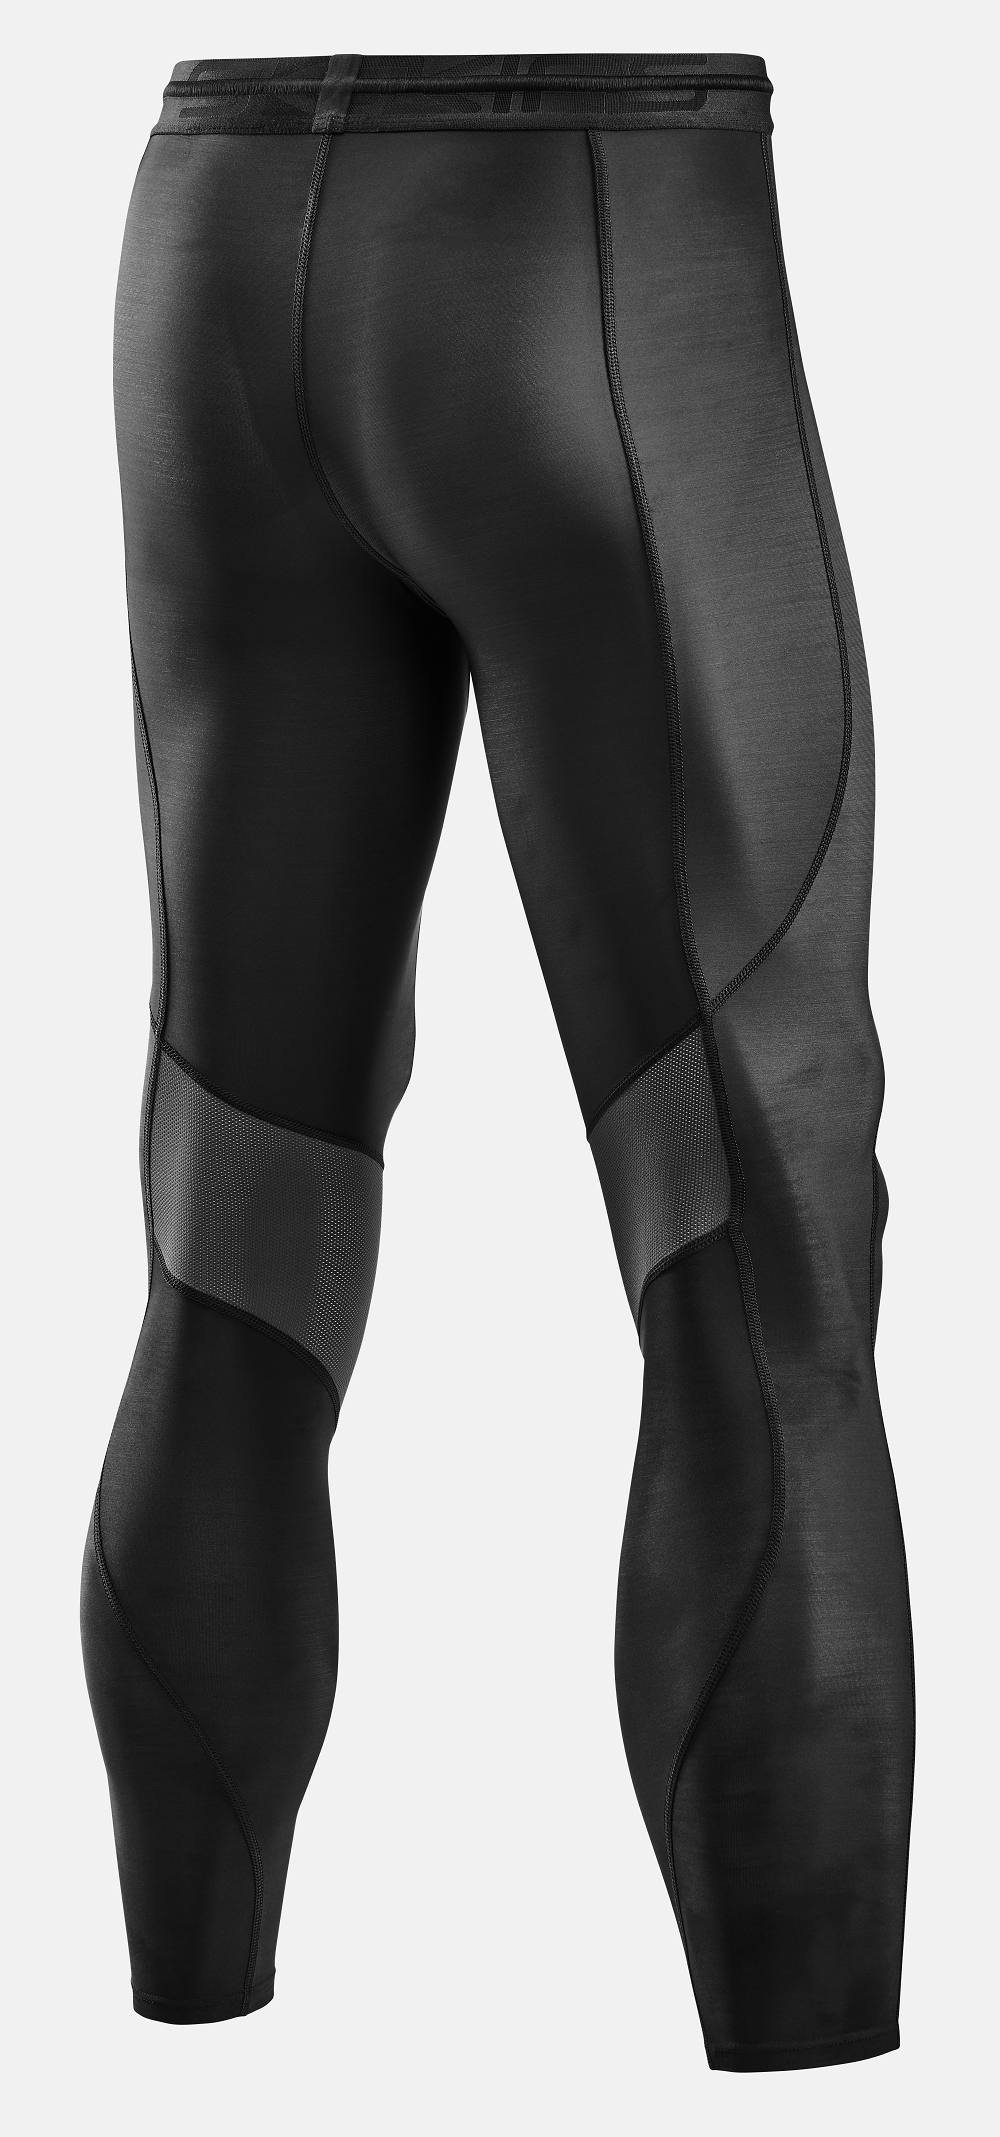  Under Armour Men's Recovery Compression Legging, Black